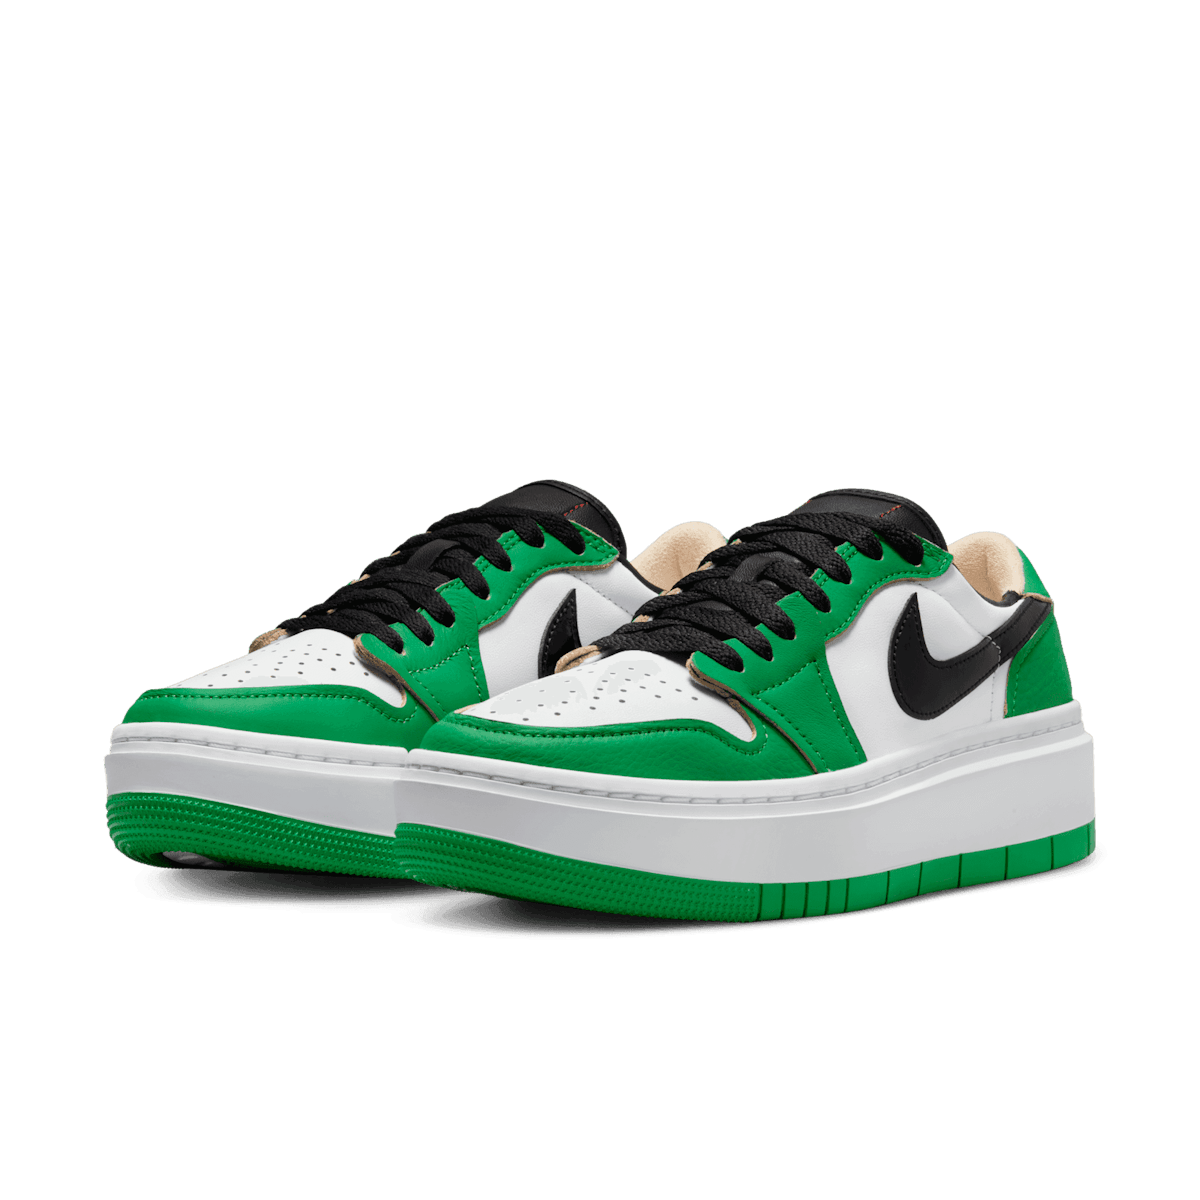 Air Jordan 1 Elevate Low SE Lucky Green (W) Angle 2